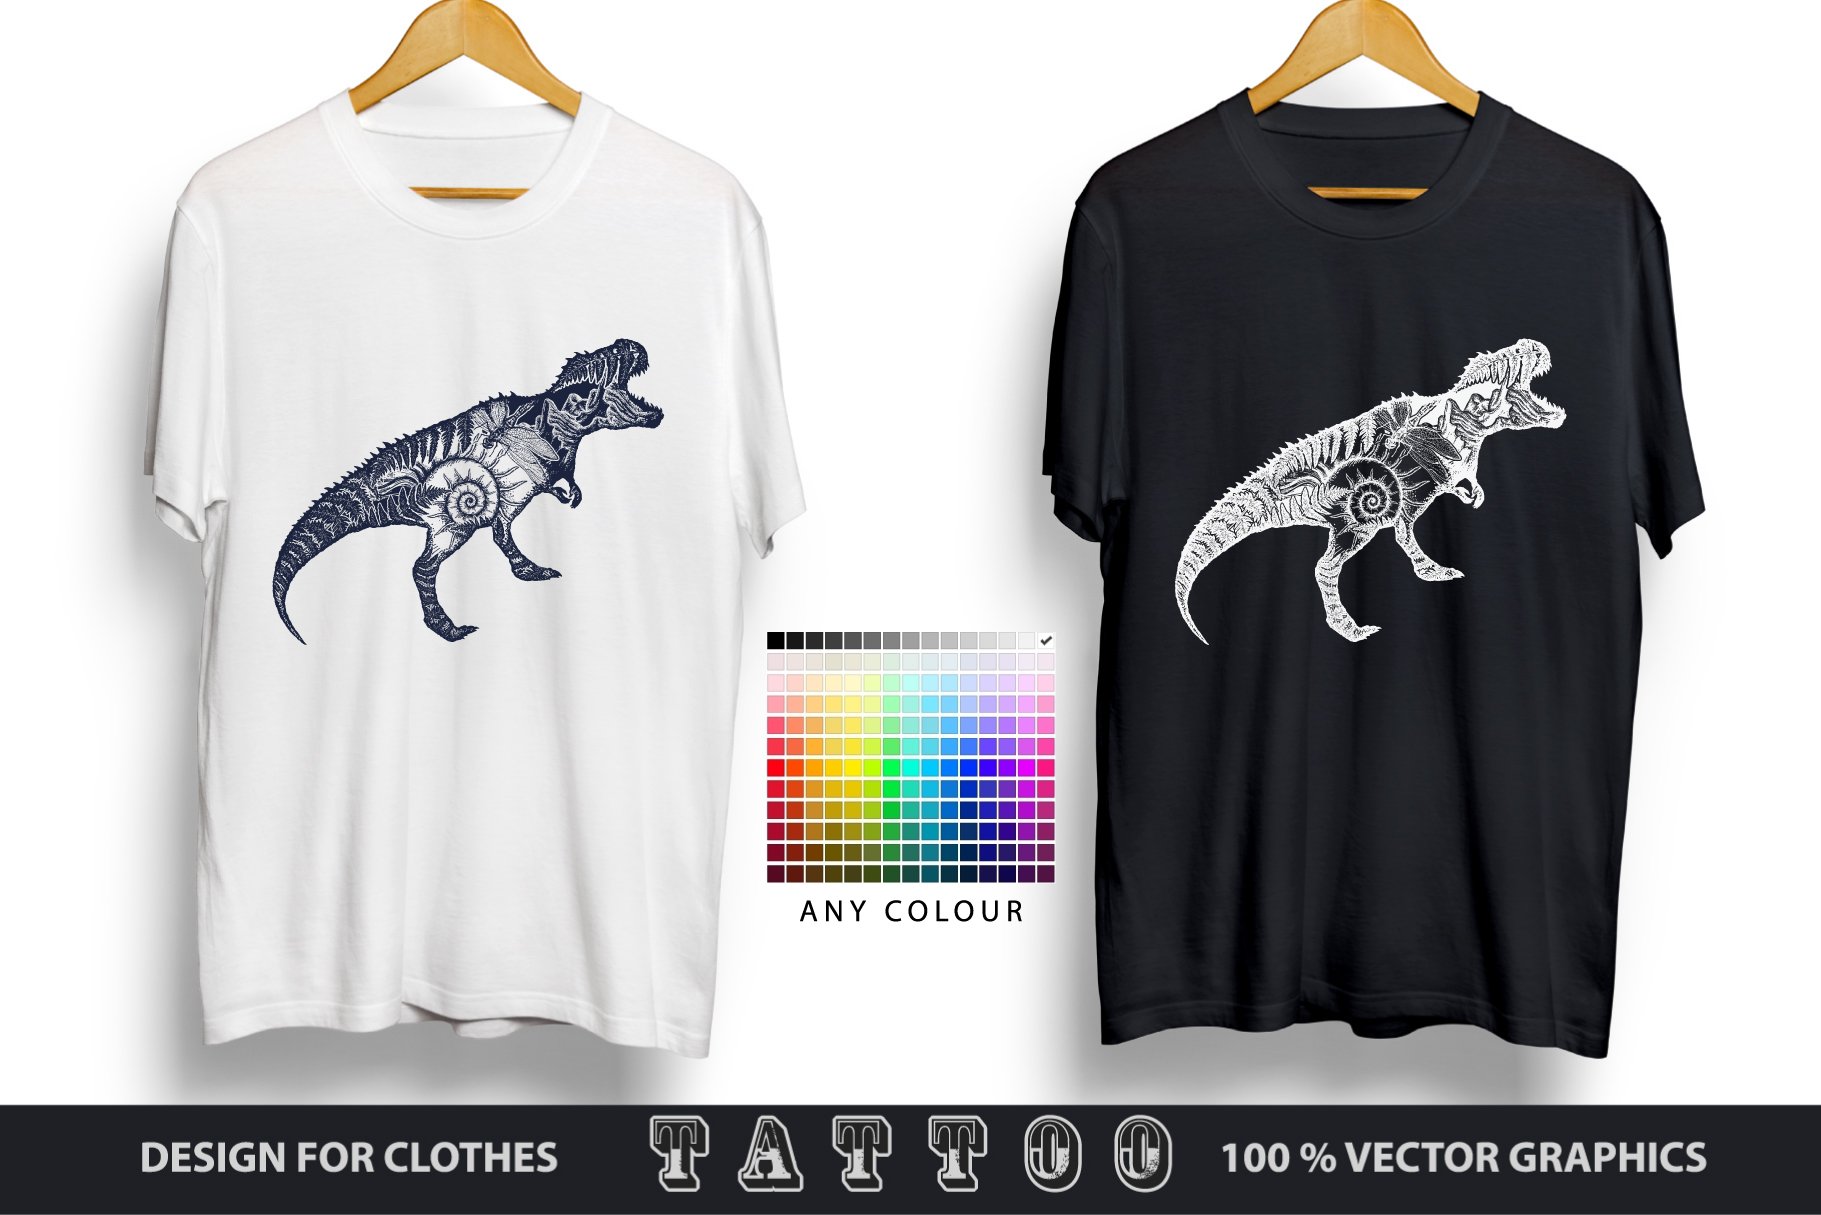 Two t-shirts - black and white with the grey and white angry dinosaurs.